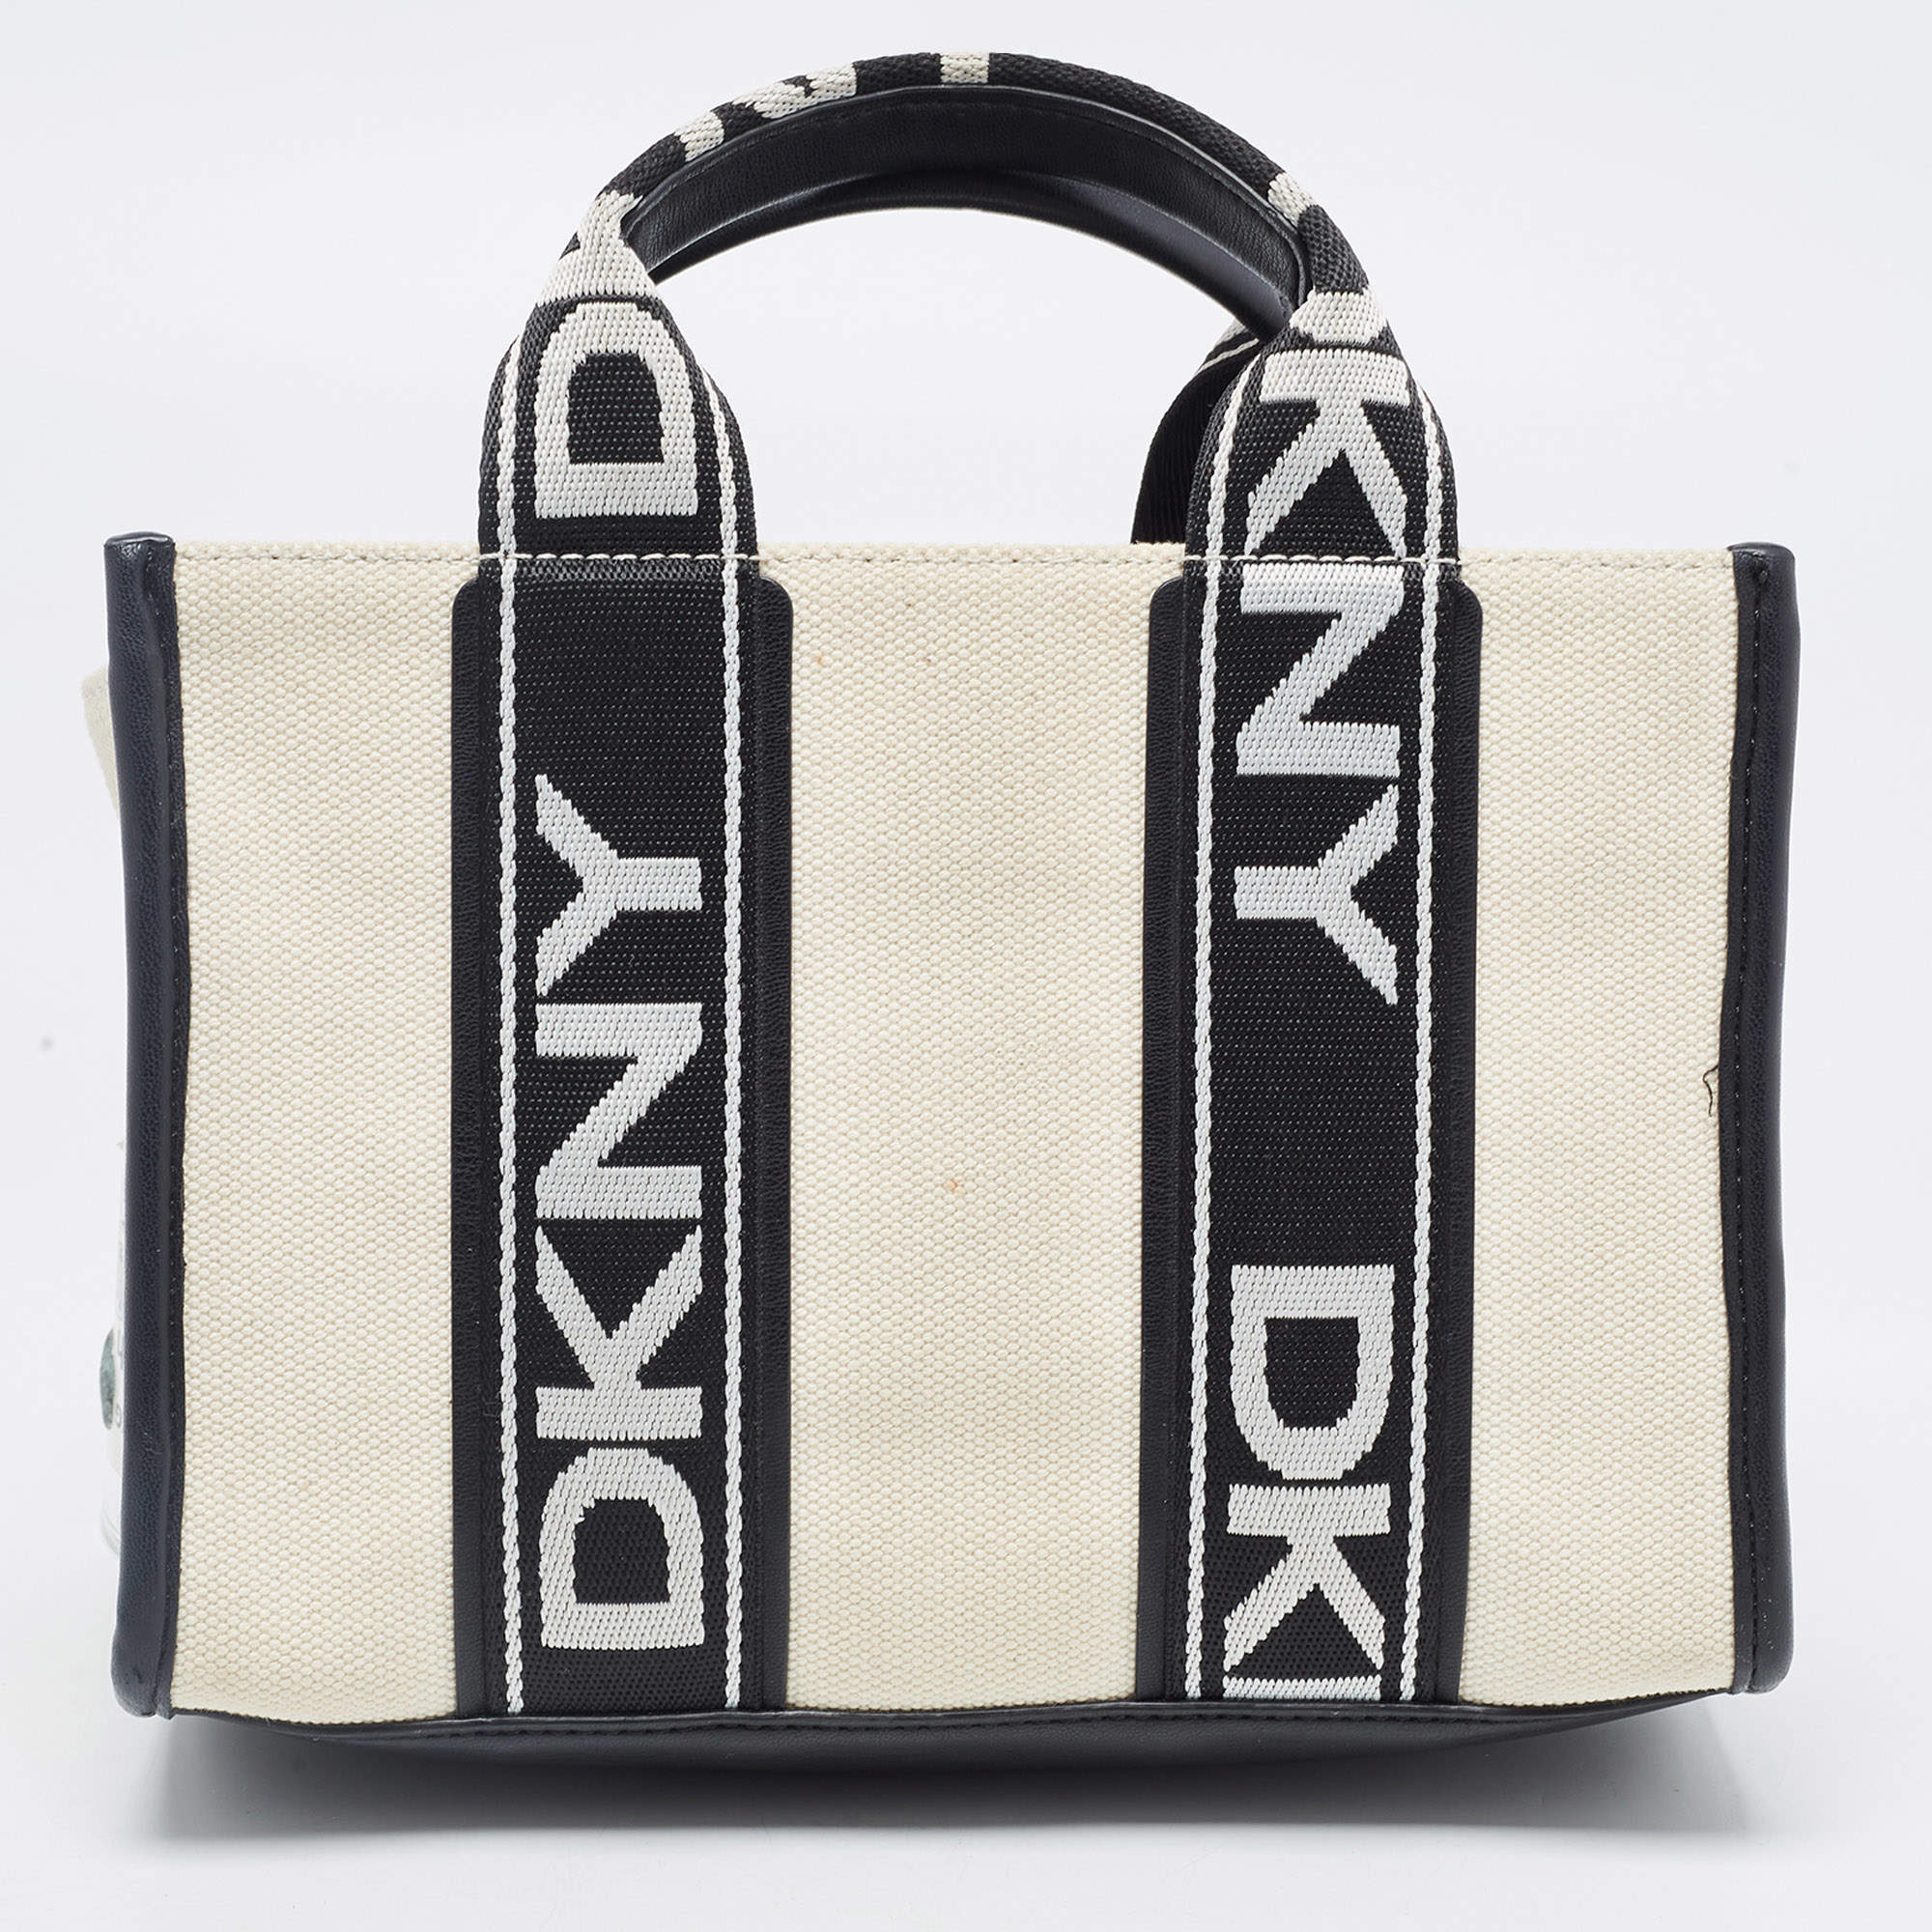 DKNY Cassie Small Tote Bag in Black